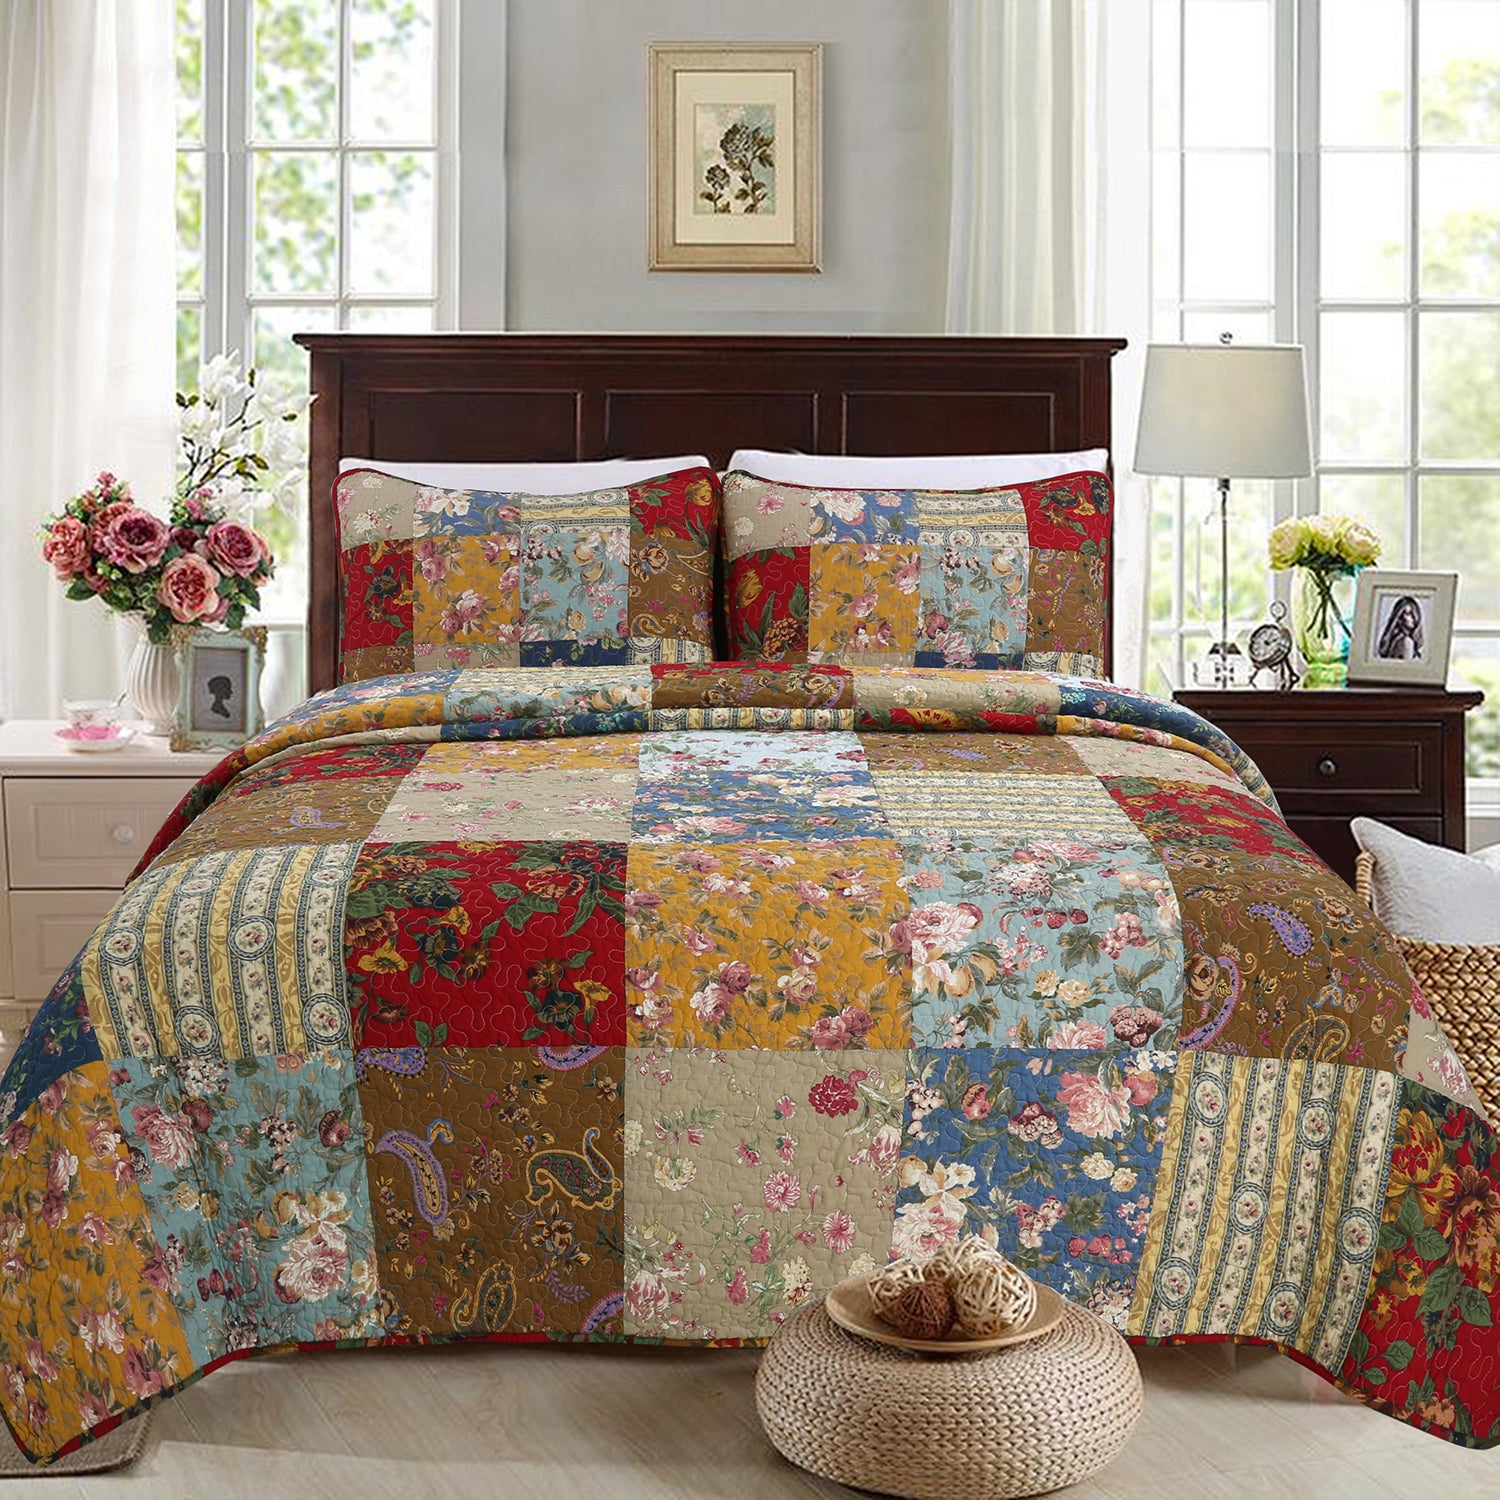 Ryleigh Floral Real Patchwork Country Garden Fall Flowers Paisley